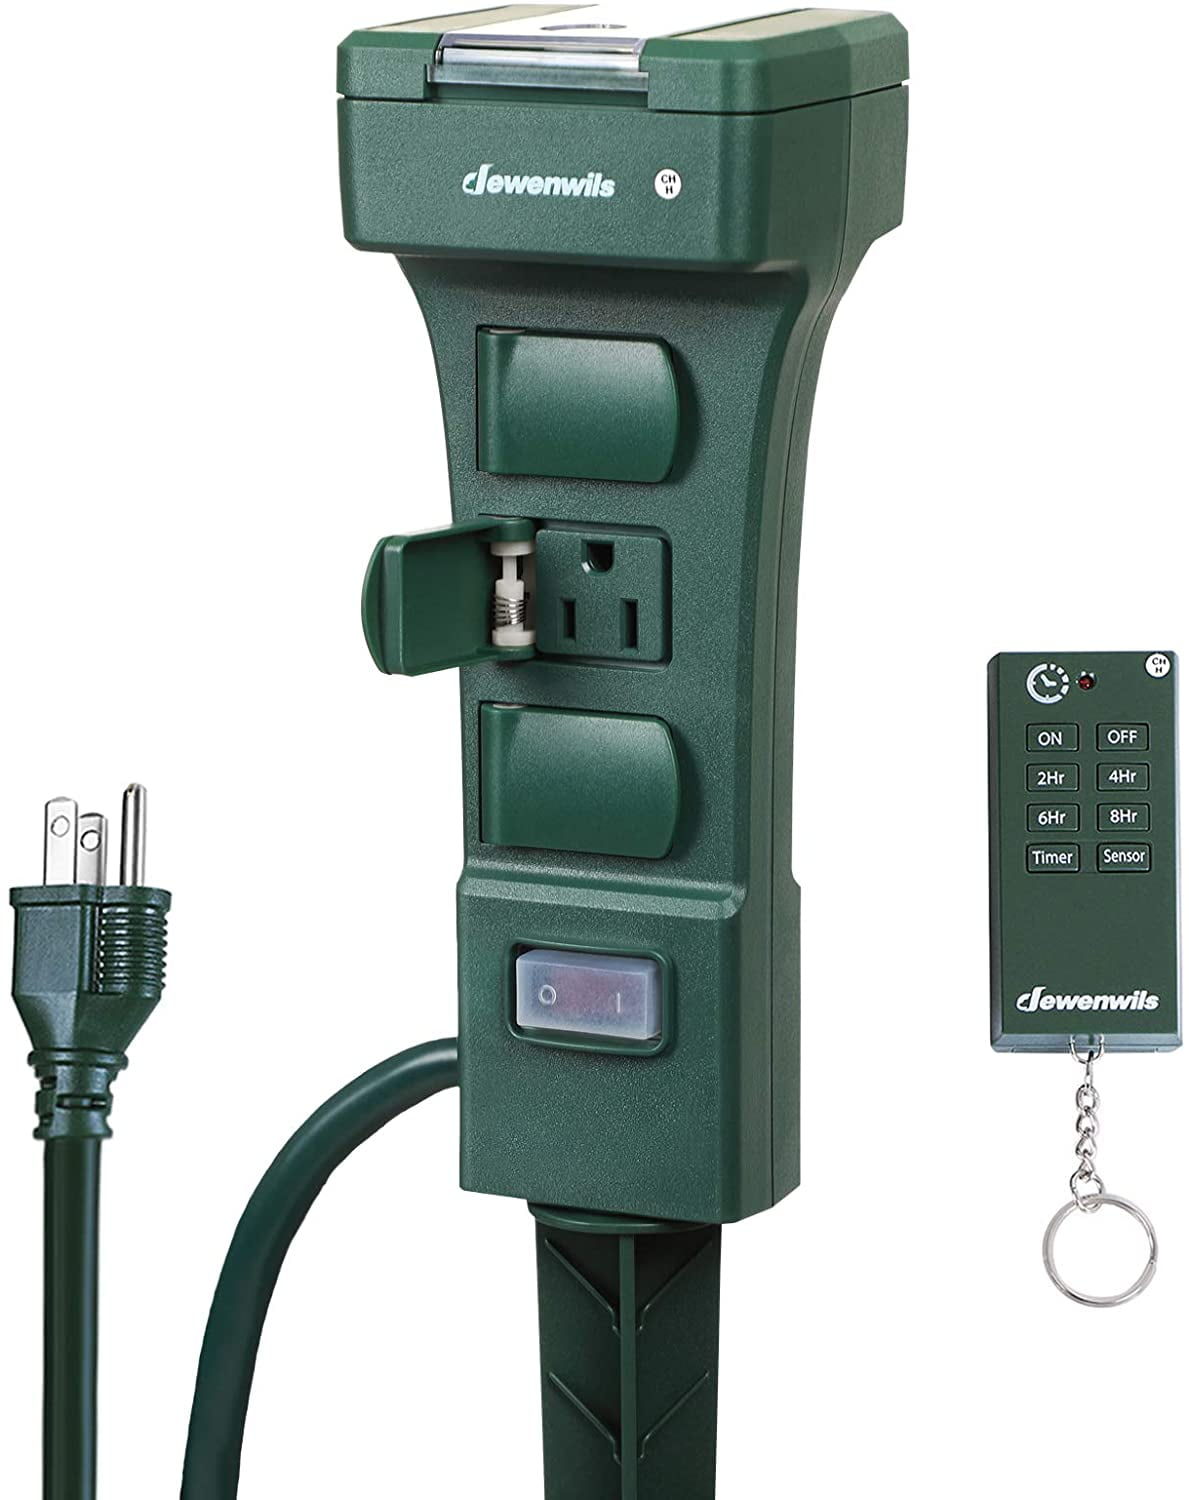 DEWENWILS Outdoor Power Stake Timer Waterproof, 100FT Remote Control Outlet  Timer, 6 Grounded Outlets 6FT Cord, Photocell Dusk to Dawn, for Outdoor  Lights, Sprinklers, Garden, 1875W/15A UL Listed